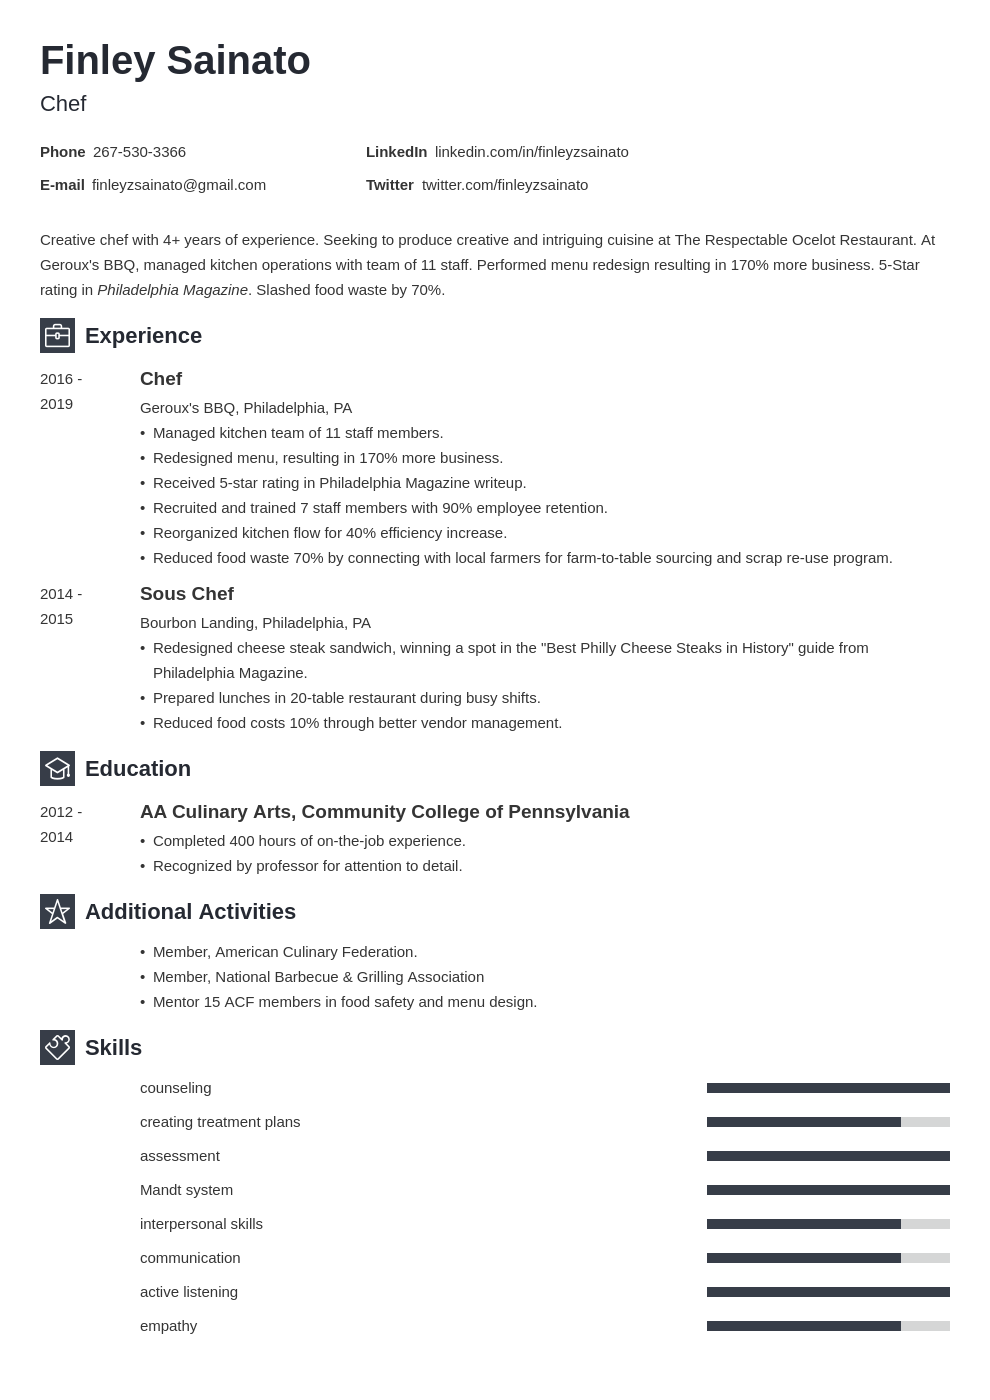 Chef Resume Examples: 25+ Writing Tips, Template & Skills